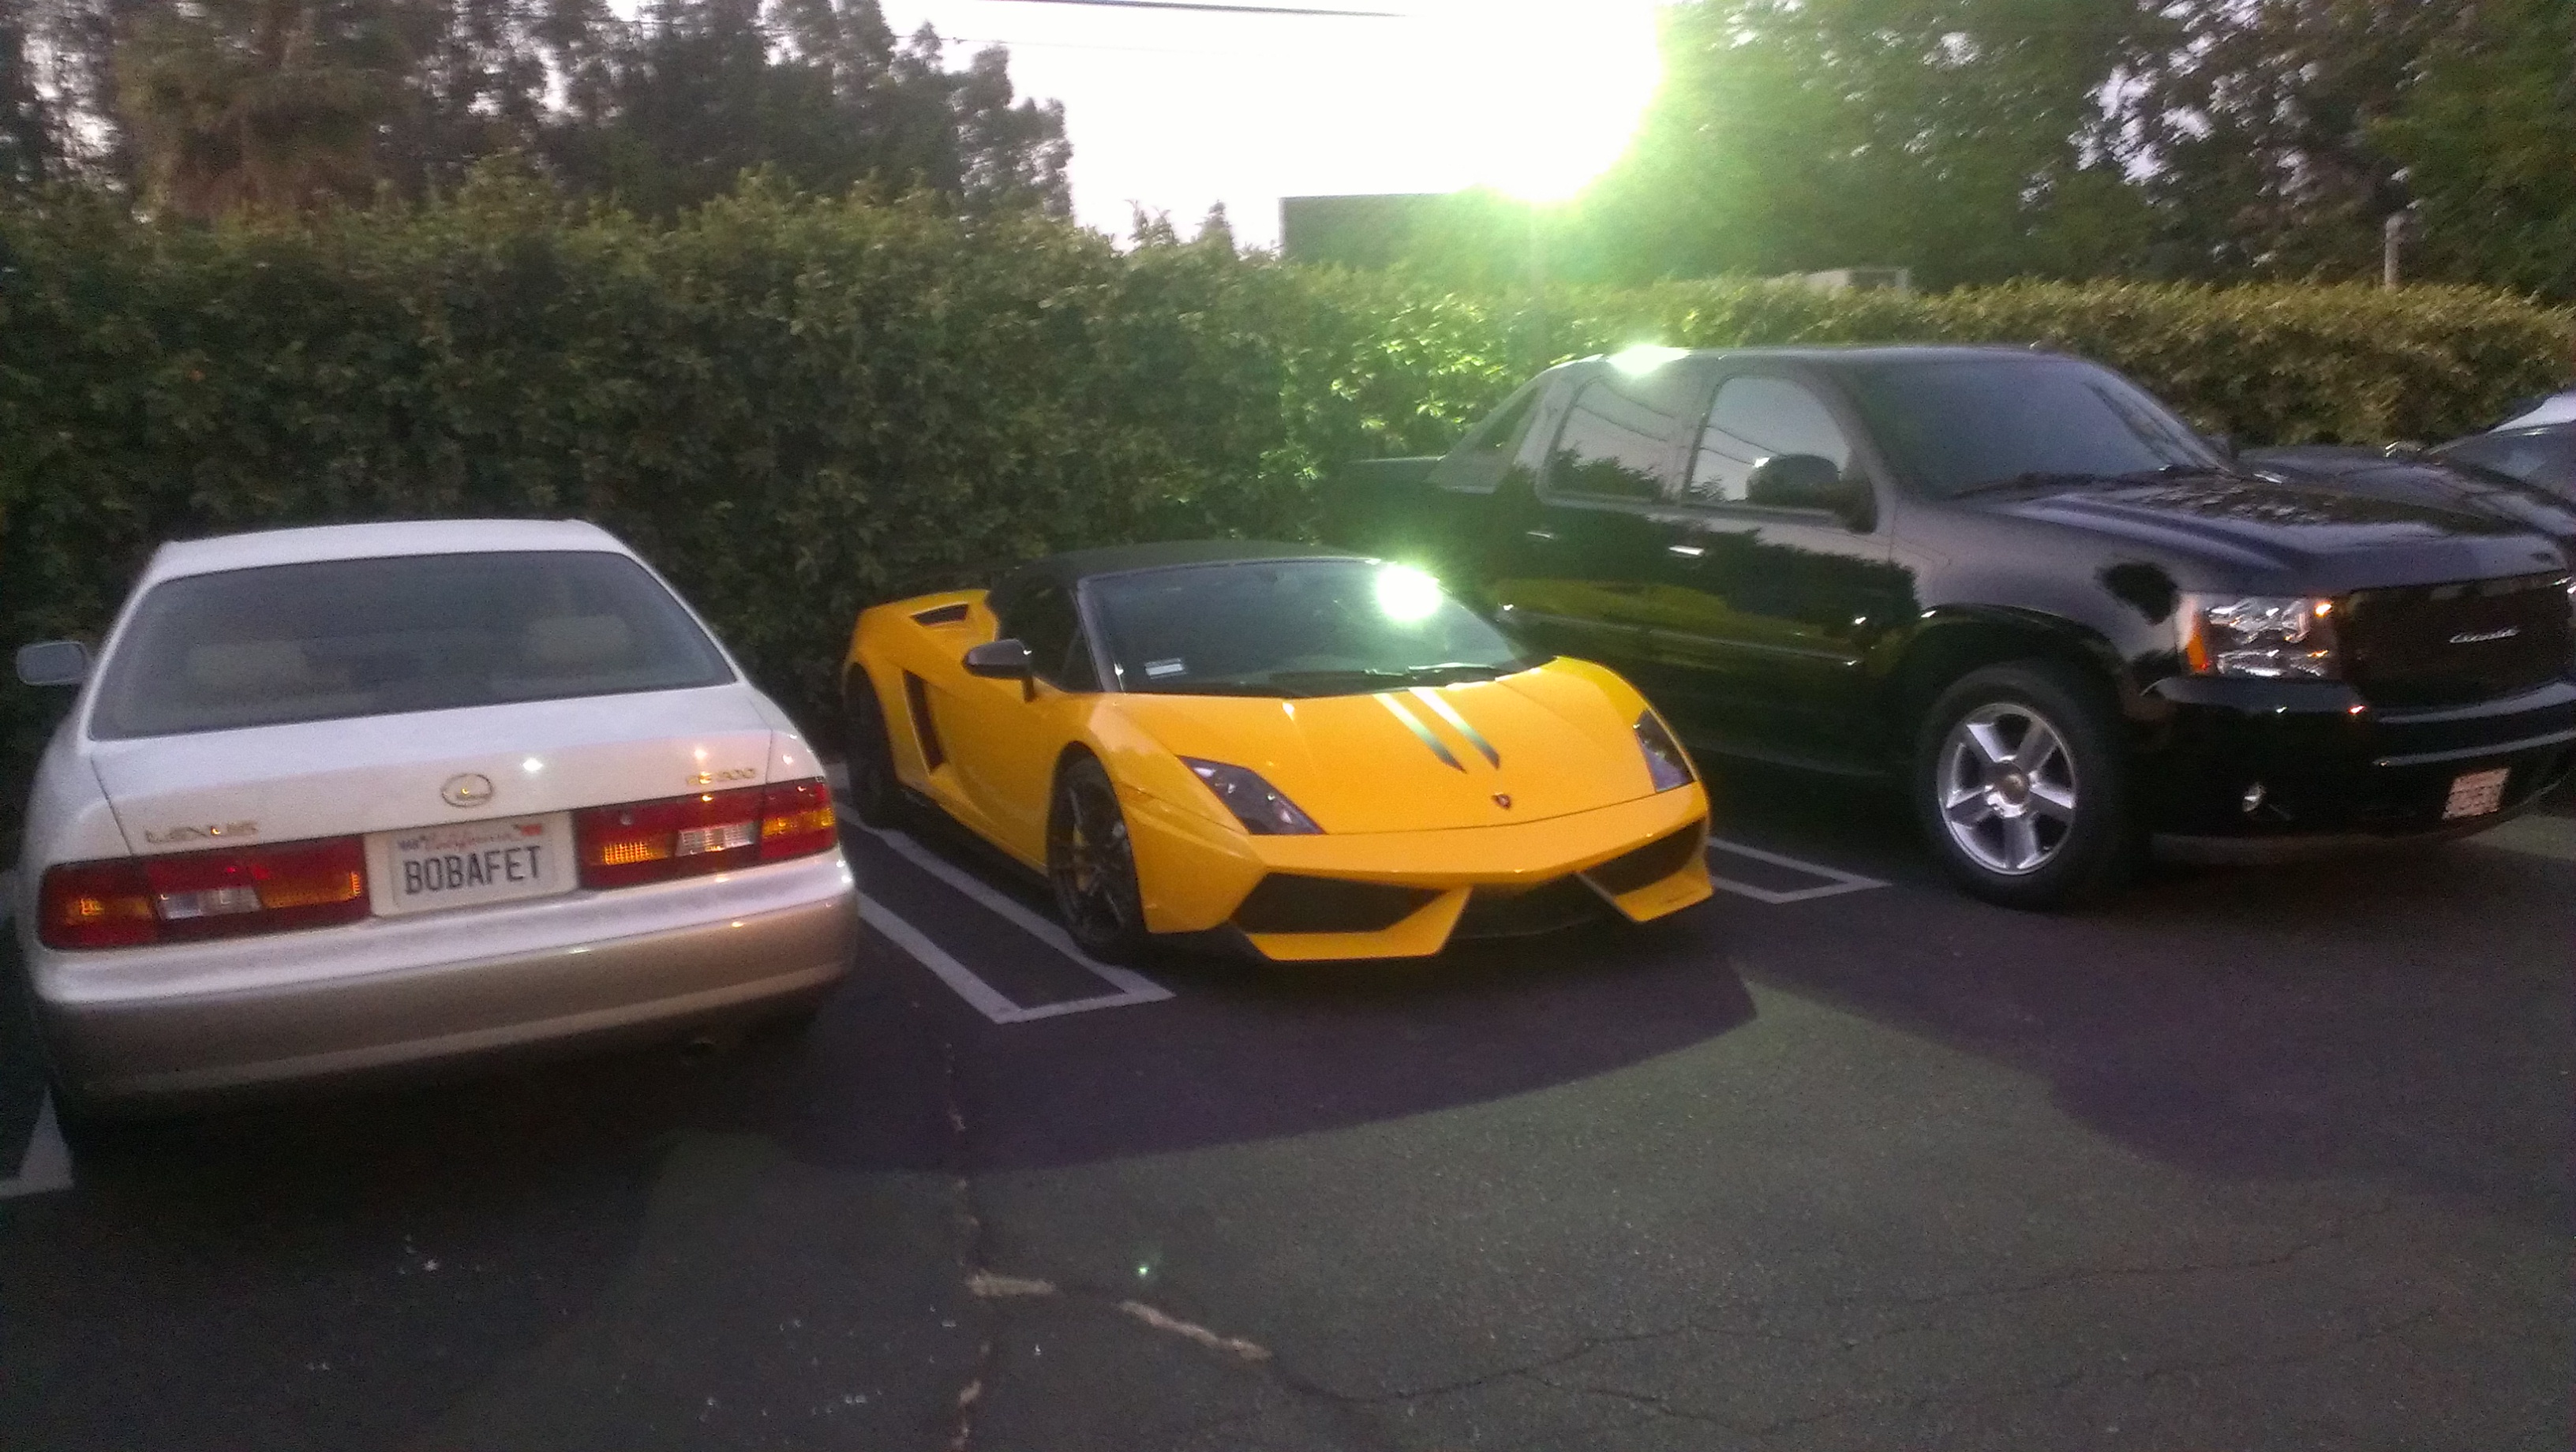 Some sweet cars